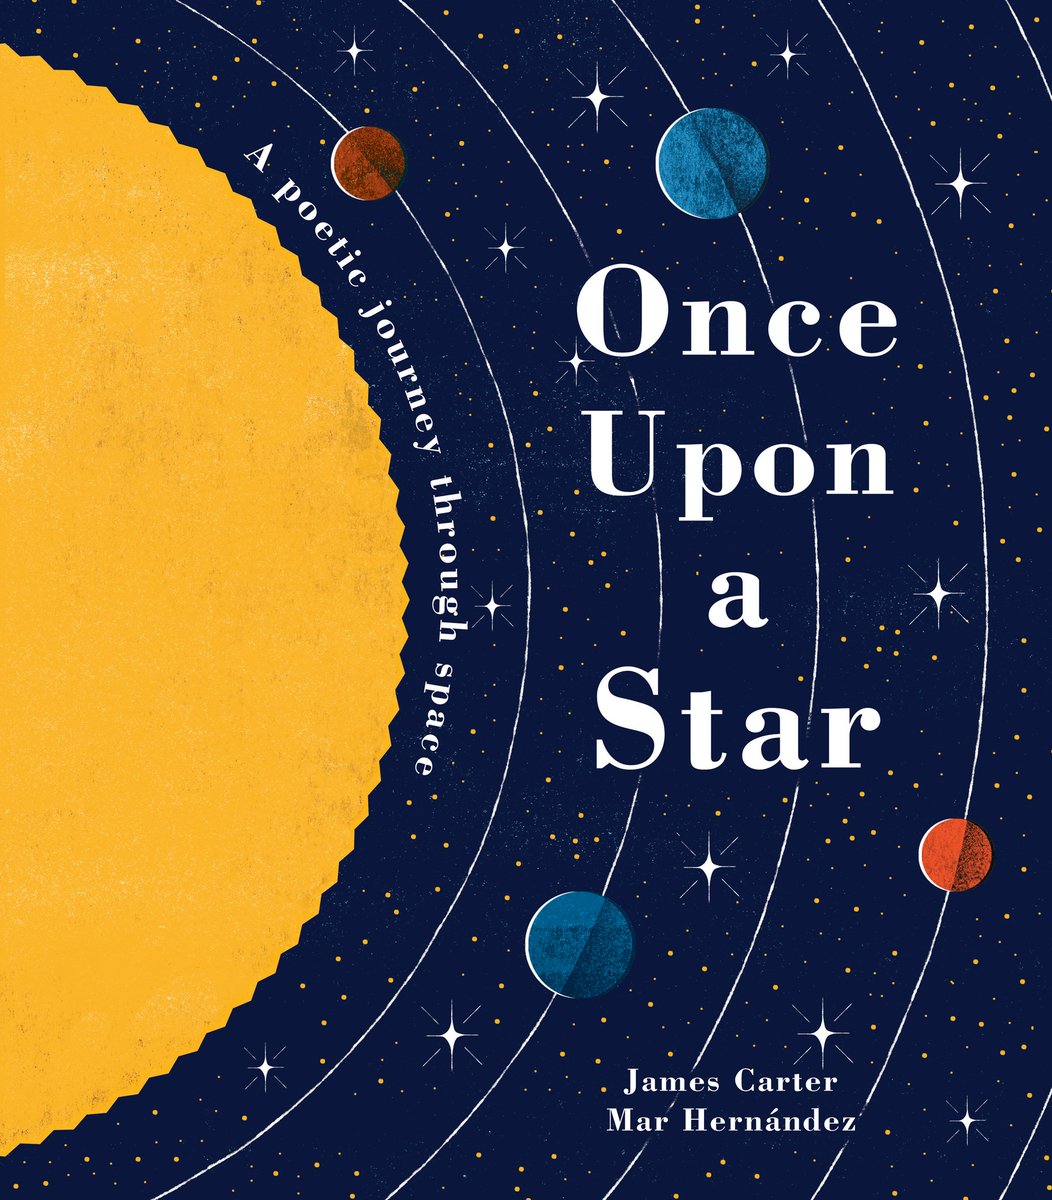 #KS1 teachers! I'll be doing a #GIVEAWAY- signed hardback copy of this brand new non-fiction/poetry book on MATERIALS + INVENTIONS #ONCEUPONABIGIDEA with luscious illustrations by @margauxcarpenti on publication day, 14.4.22. Watch this space! @LittleTigerUK #edutwitter